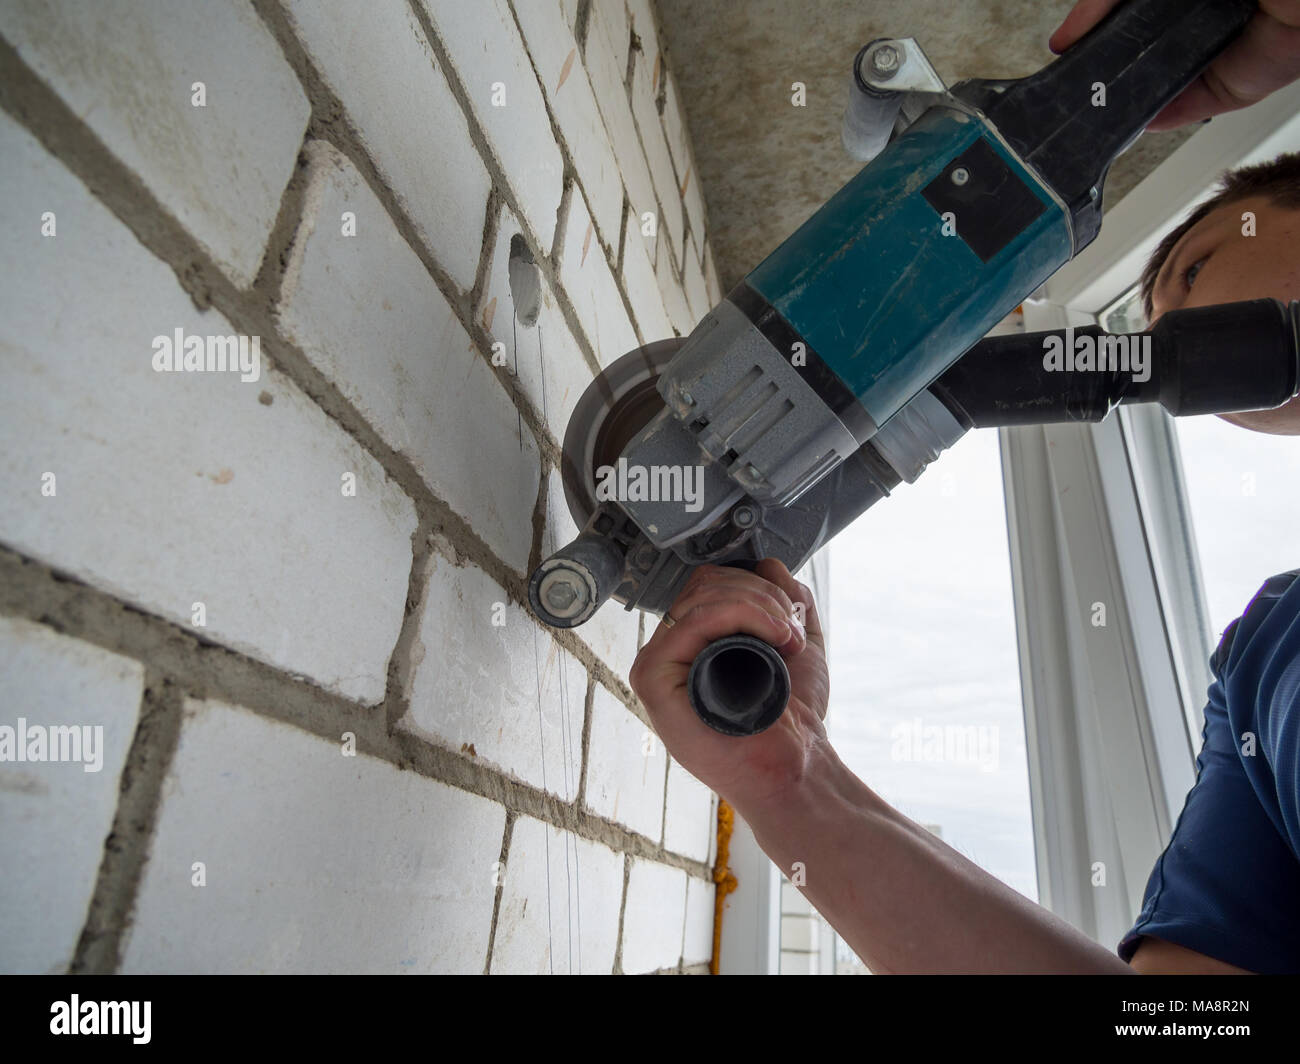 Voronezh, Russia - May 13, 2017: Making a groove in the wall with an angle grinder Stock Photo